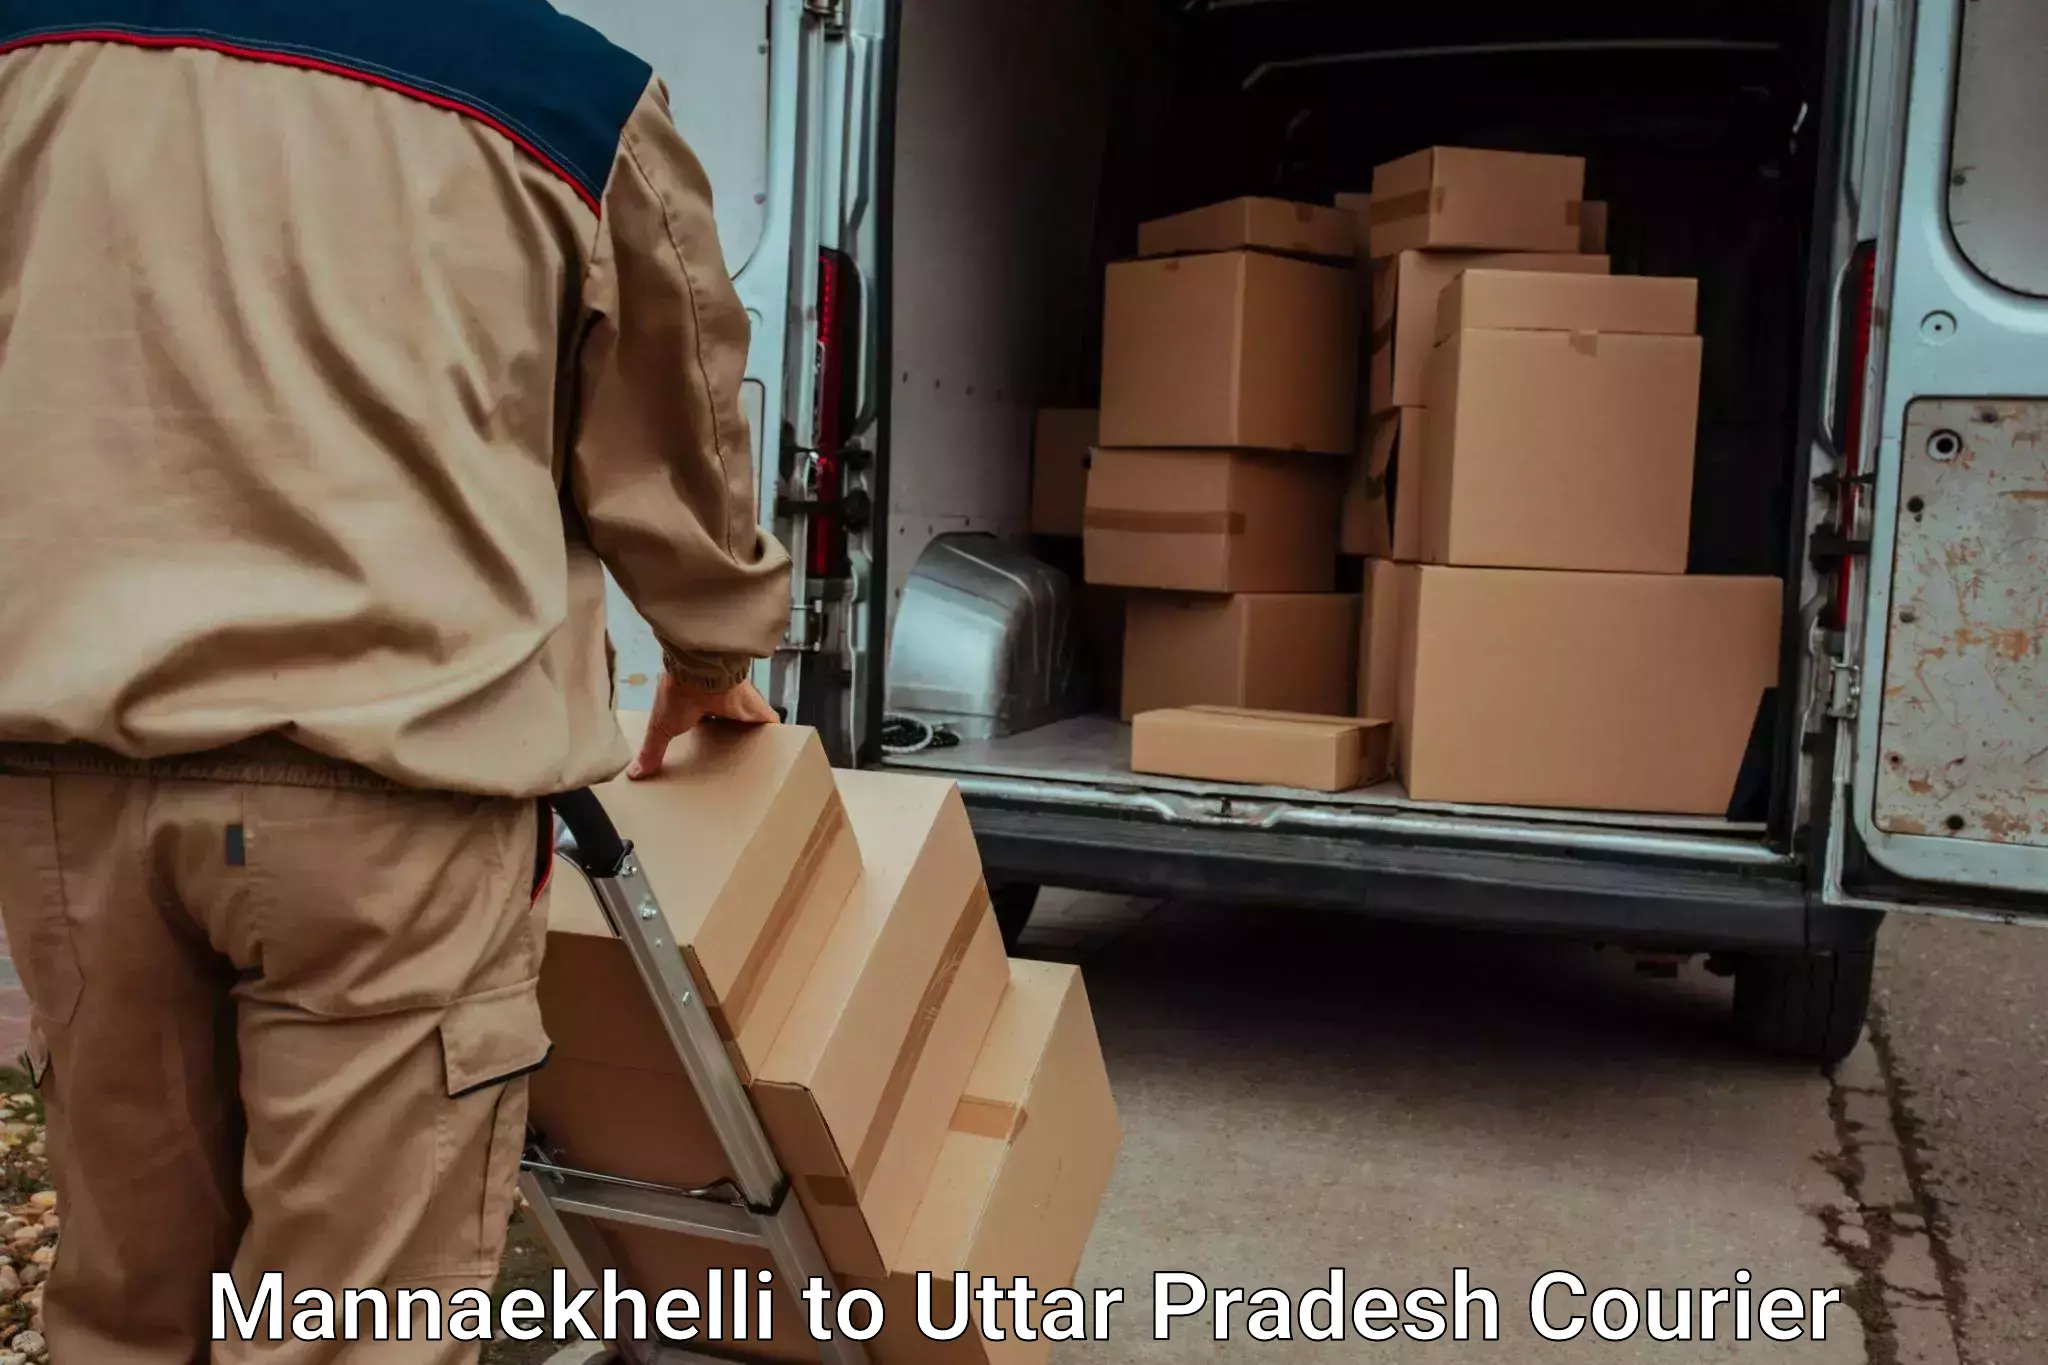 Trusted relocation experts in Mannaekhelli to Shahjahanpur